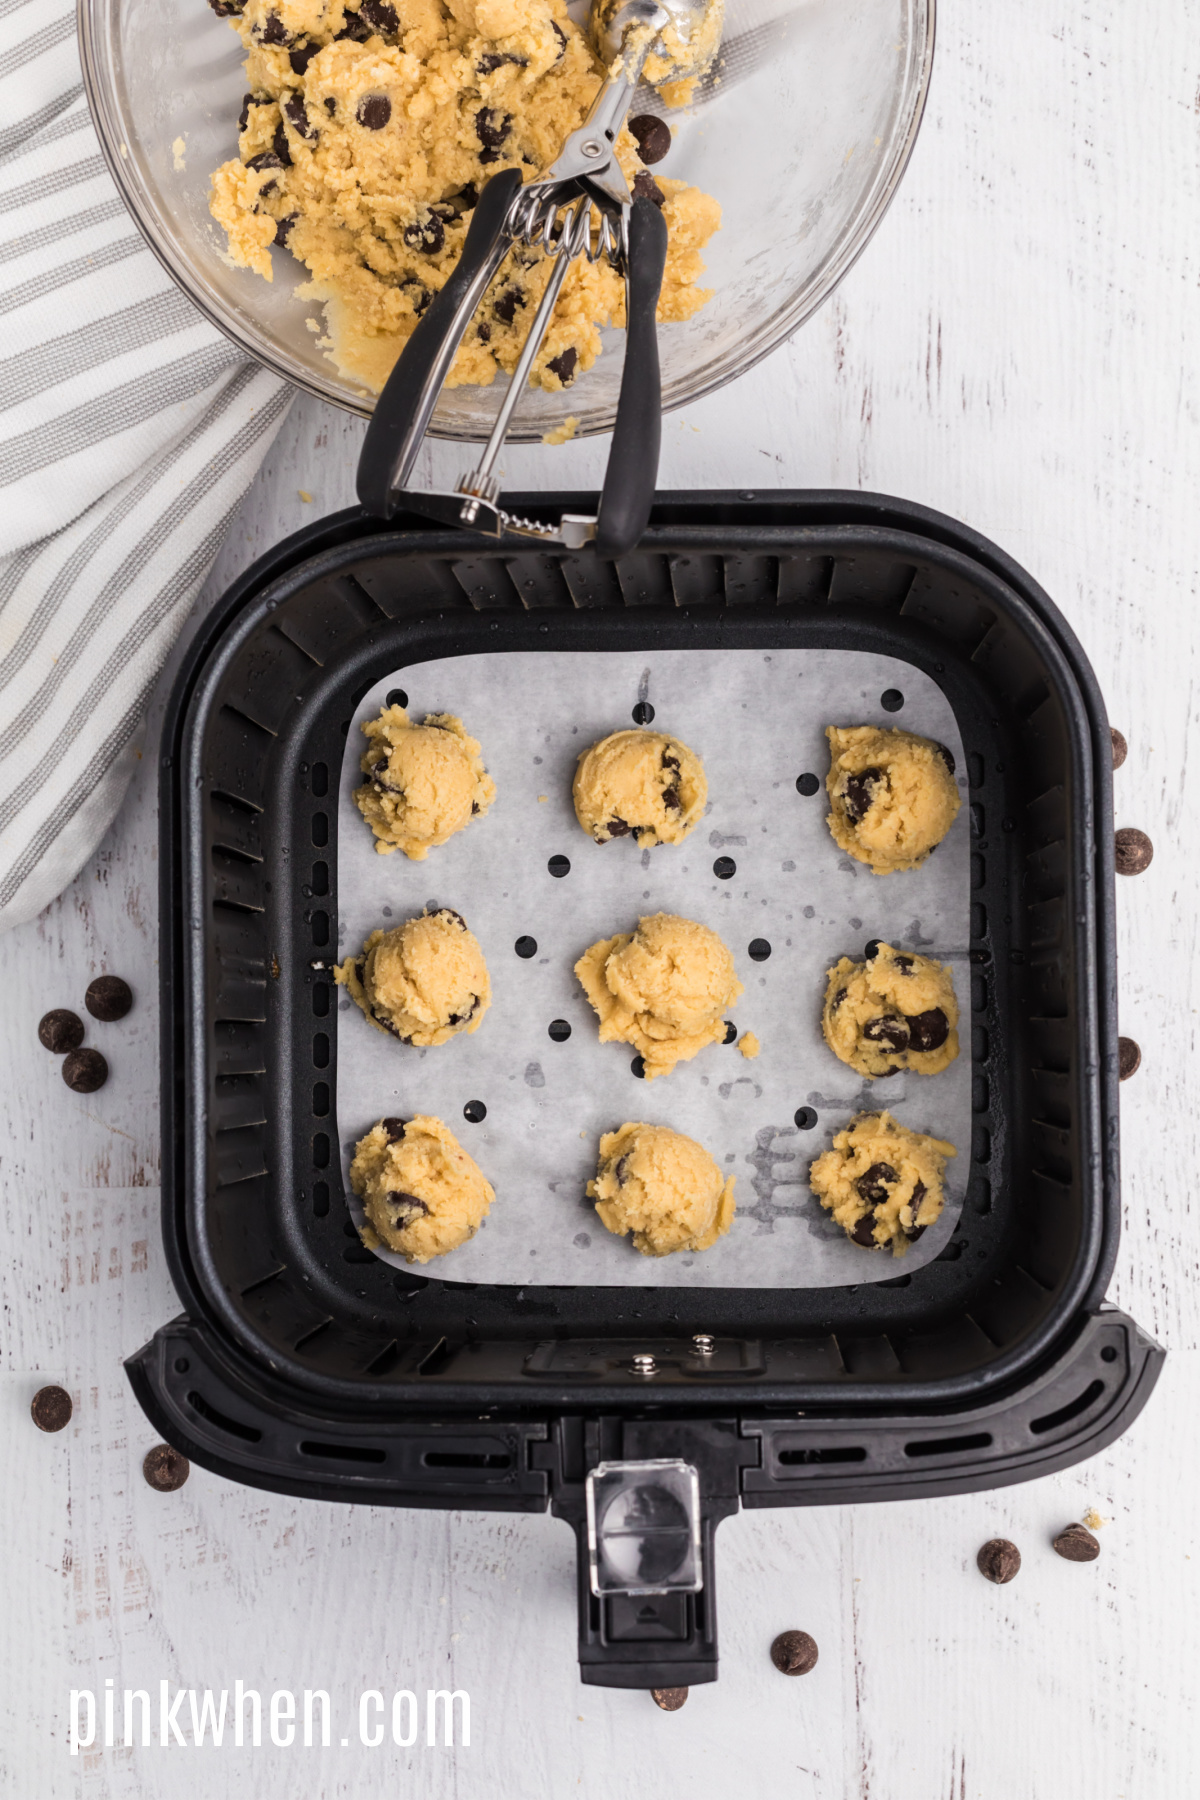 Cookie dough on parchment paper in the basket of the air fryer, ready to bake.